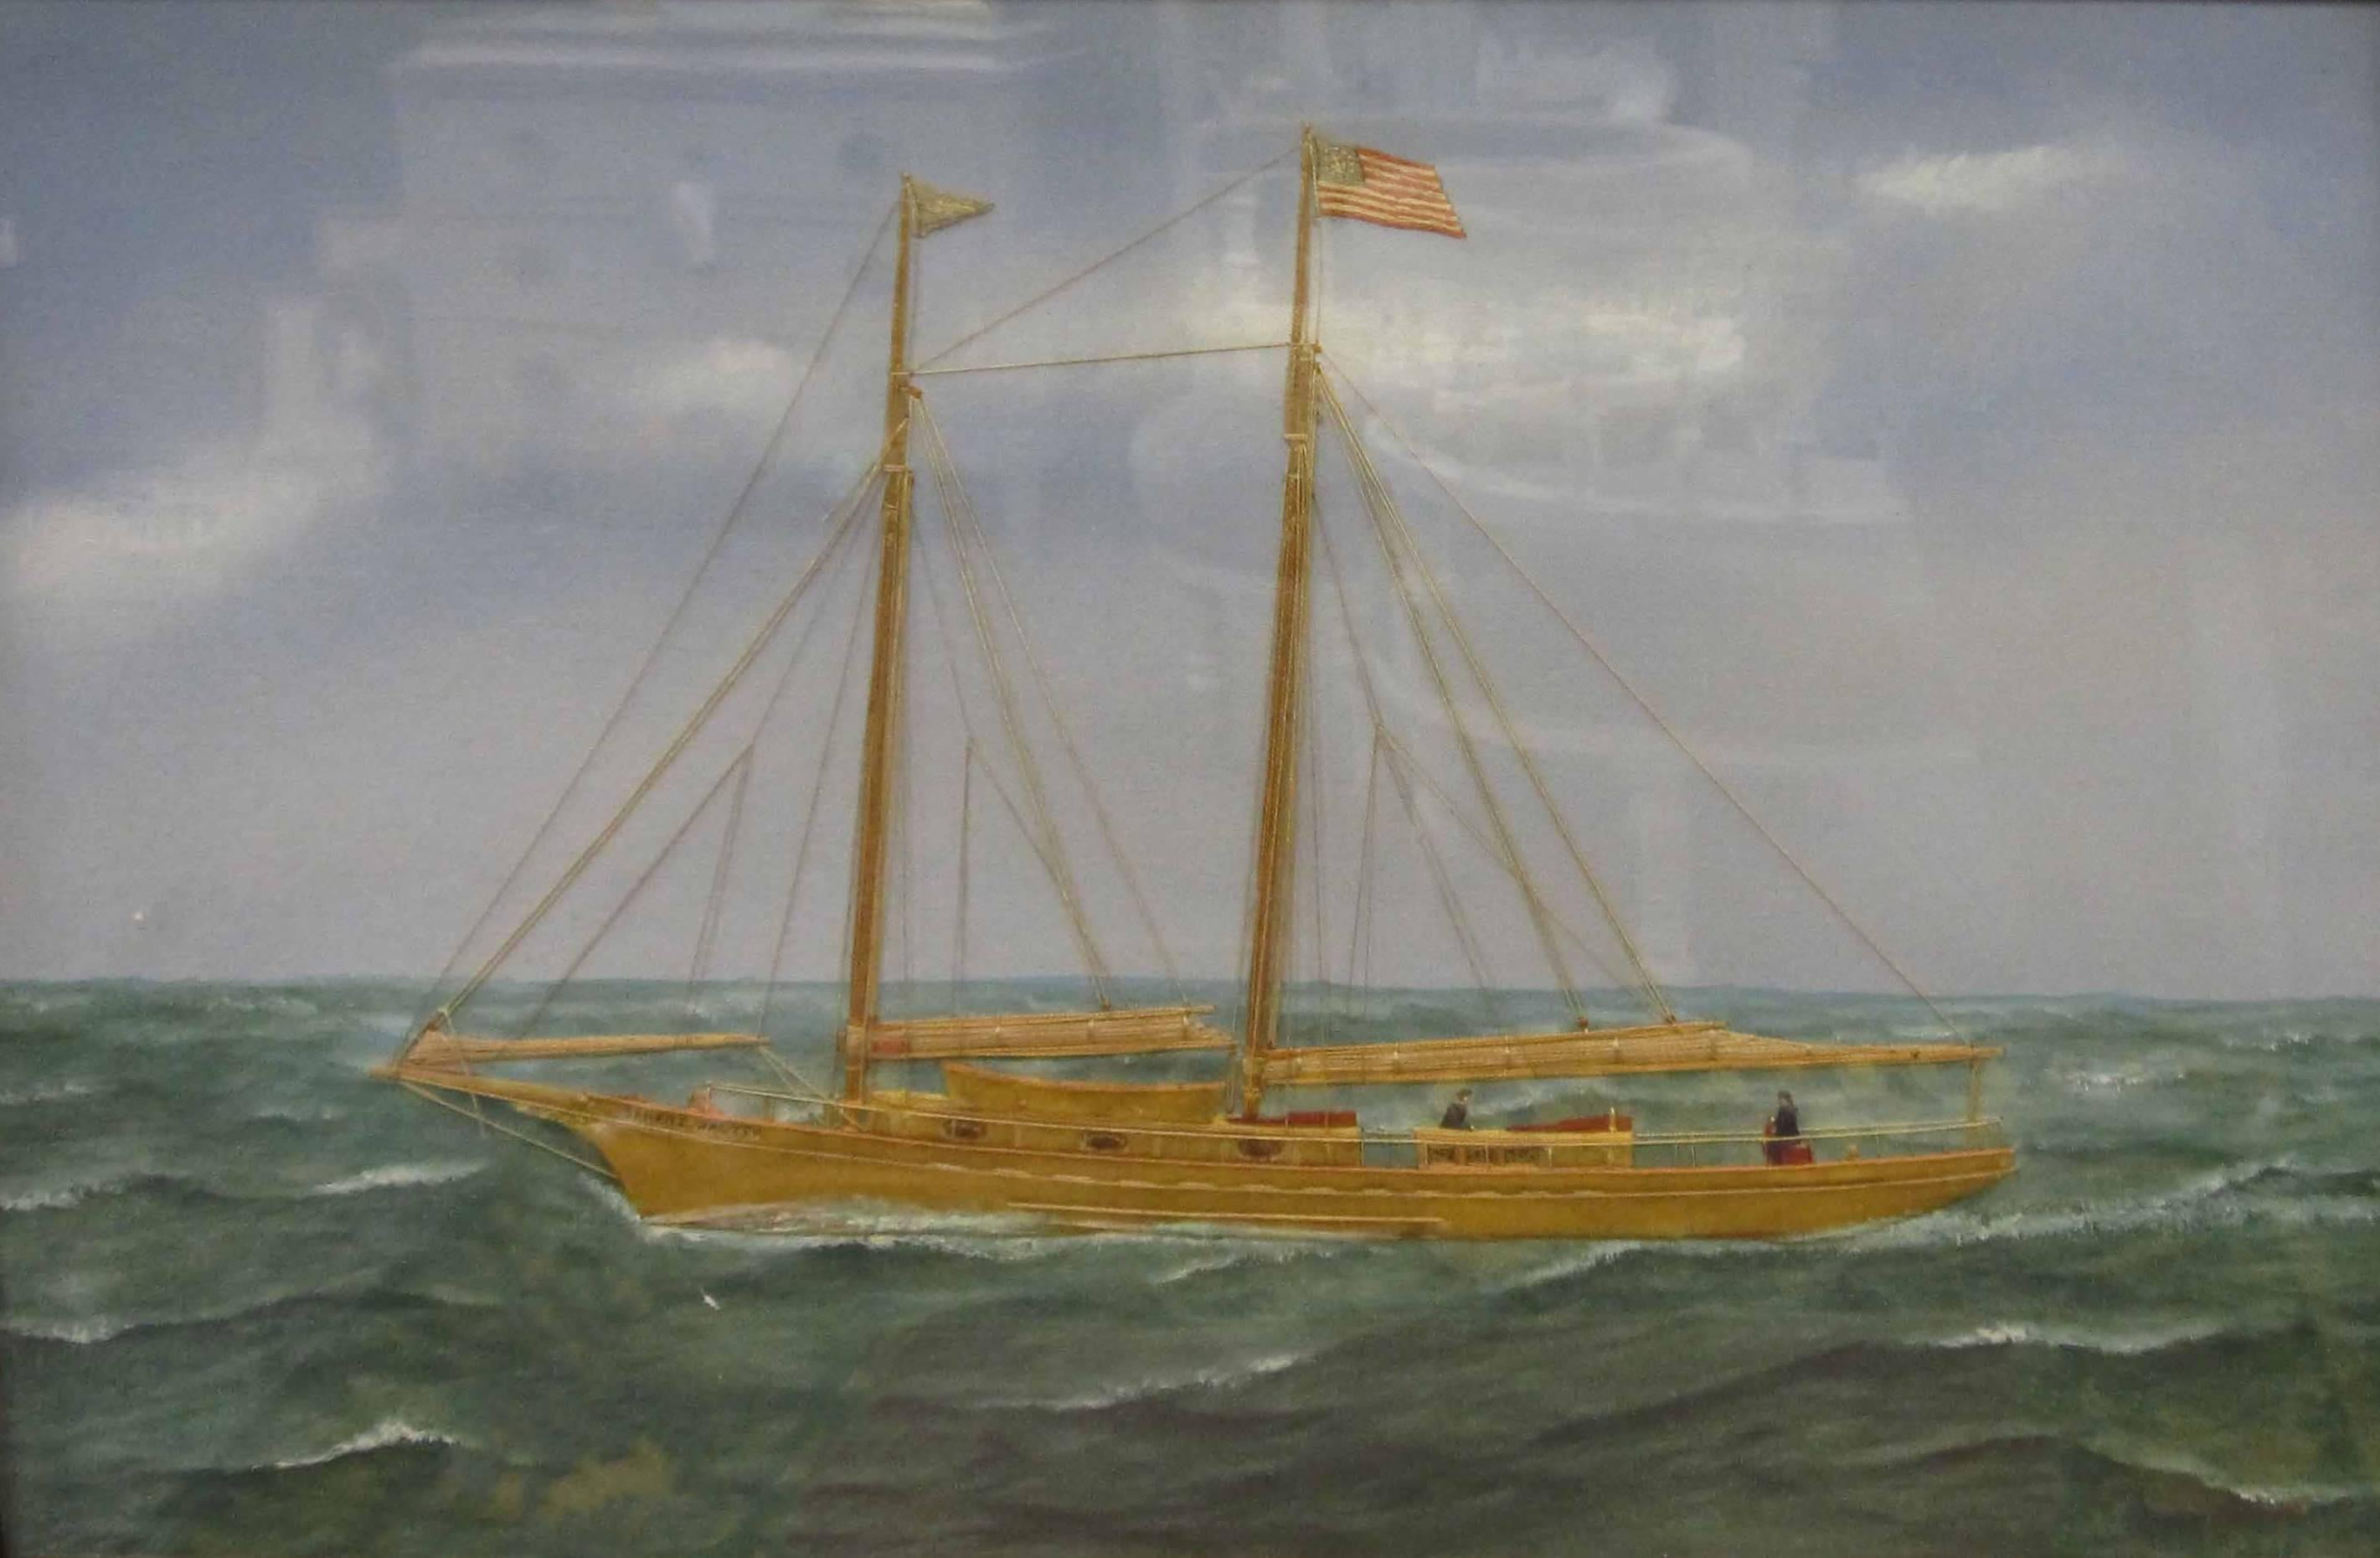 American Classical Thomas Willis Picture of the Two-Masted Schooner, Sarah E. Walters